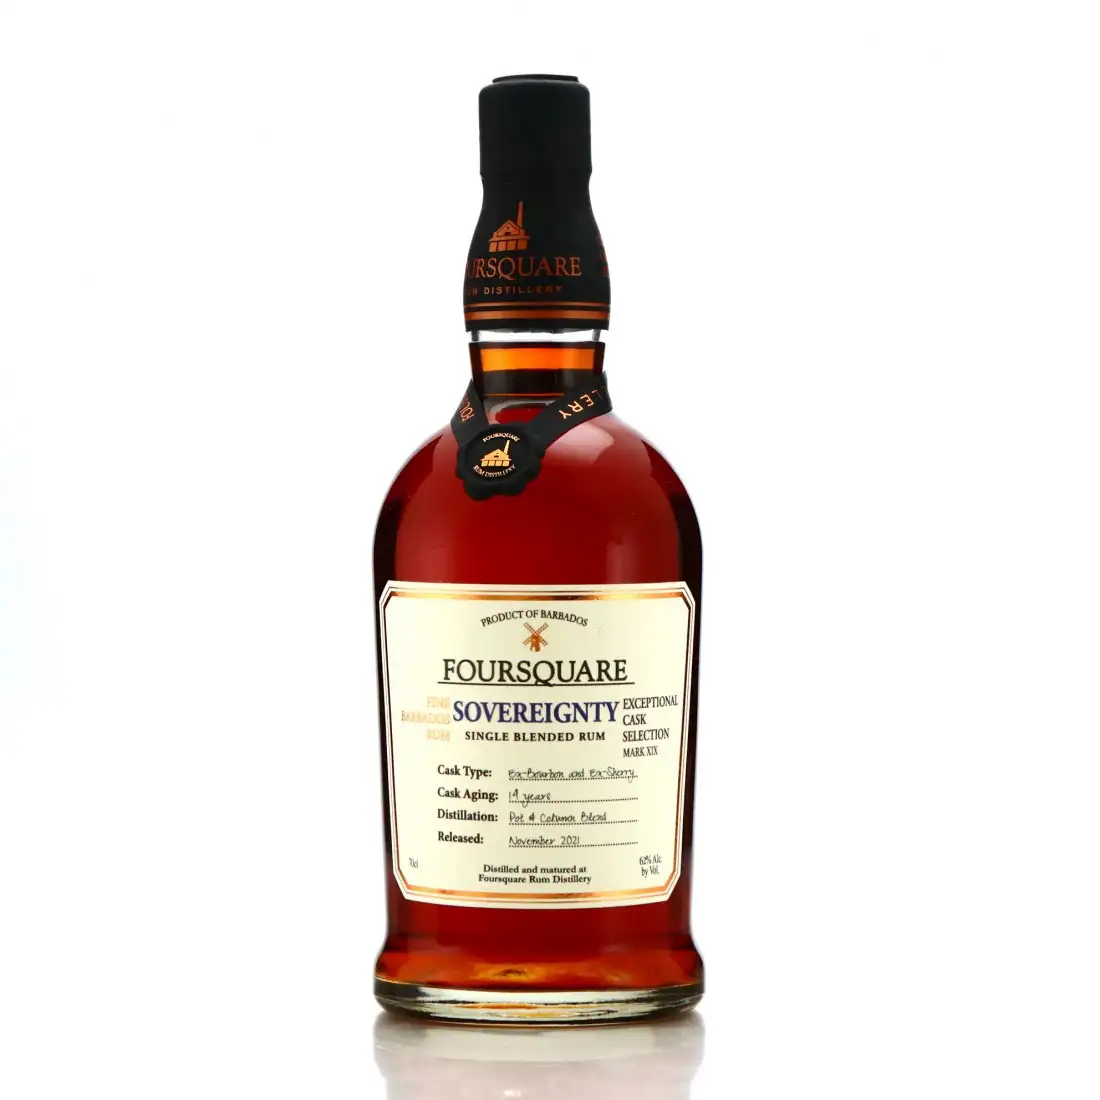 Image of the front of the bottle of the rum Exceptional Cask Selection XIX Sovereignty